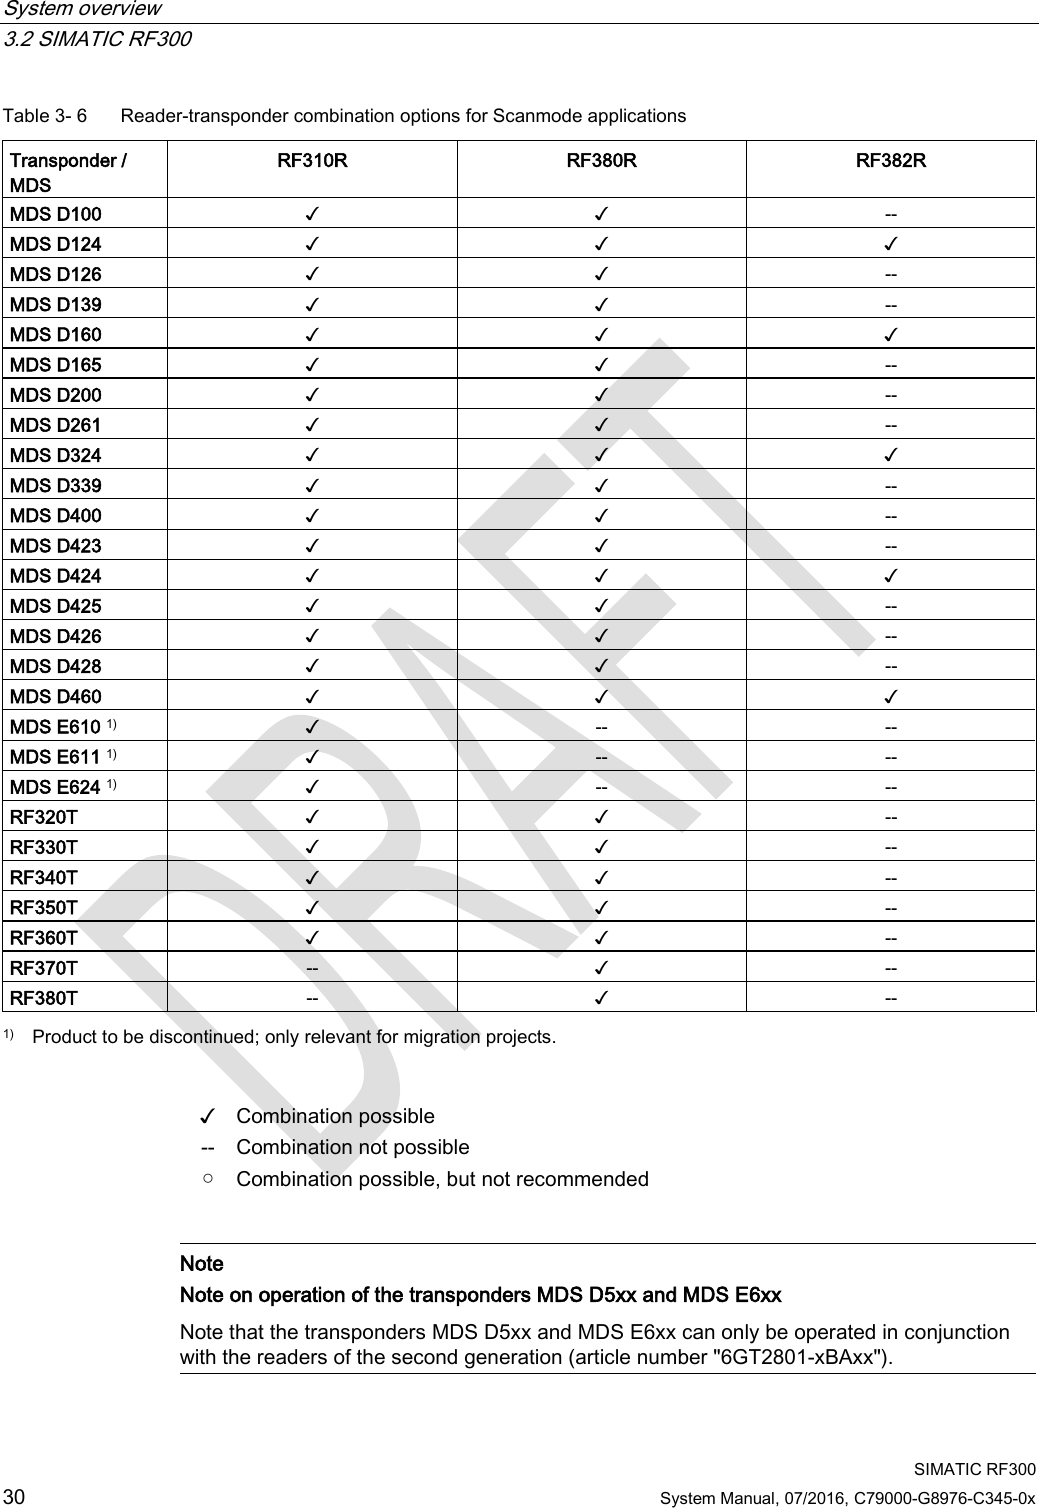 System overview   3.2 SIMATIC RF300  SIMATIC RF300 30 System Manual, 07/2016, C79000-G8976-C345-0x Table 3- 6  Reader-transponder combination options for Scanmode applications  Transponder / MDS RF310R RF380R RF382R MDS D100 ✓ ✓ -- MDS D124 ✓ ✓ ✓ MDS D126 ✓ ✓ -- MDS D139 ✓ ✓ -- MDS D160 ✓ ✓ ✓ MDS D165 ✓ ✓ -- MDS D200 ✓ ✓ -- MDS D261 ✓ ✓ -- MDS D324 ✓ ✓ ✓ MDS D339 ✓ ✓ -- MDS D400 ✓ ✓ -- MDS D423 ✓ ✓ -- MDS D424 ✓ ✓ ✓ MDS D425 ✓ ✓ -- MDS D426 ✓ ✓ -- MDS D428 ✓ ✓ -- MDS D460 ✓ ✓ ✓ MDS E610 1) ✓ -- -- MDS E611 1) ✓ -- -- MDS E624 1) ✓ -- -- RF320T ✓ ✓  -- RF330T ✓ ✓ -- RF340T ✓ ✓ -- RF350T ✓ ✓ -- RF360T ✓ ✓ -- RF370T -- ✓ -- RF380T -- ✓ --  1) Product to be discontinued; only relevant for migration projects.   ✓ Combination possible -- Combination not possible ○ Combination possible, but not recommended    Note Note on operation of the transponders MDS D5xx and MDS E6xx Note that the transponders MDS D5xx and MDS E6xx can only be operated in conjunction with the readers of the second generation (article number &quot;6GT2801-xBAxx&quot;).  